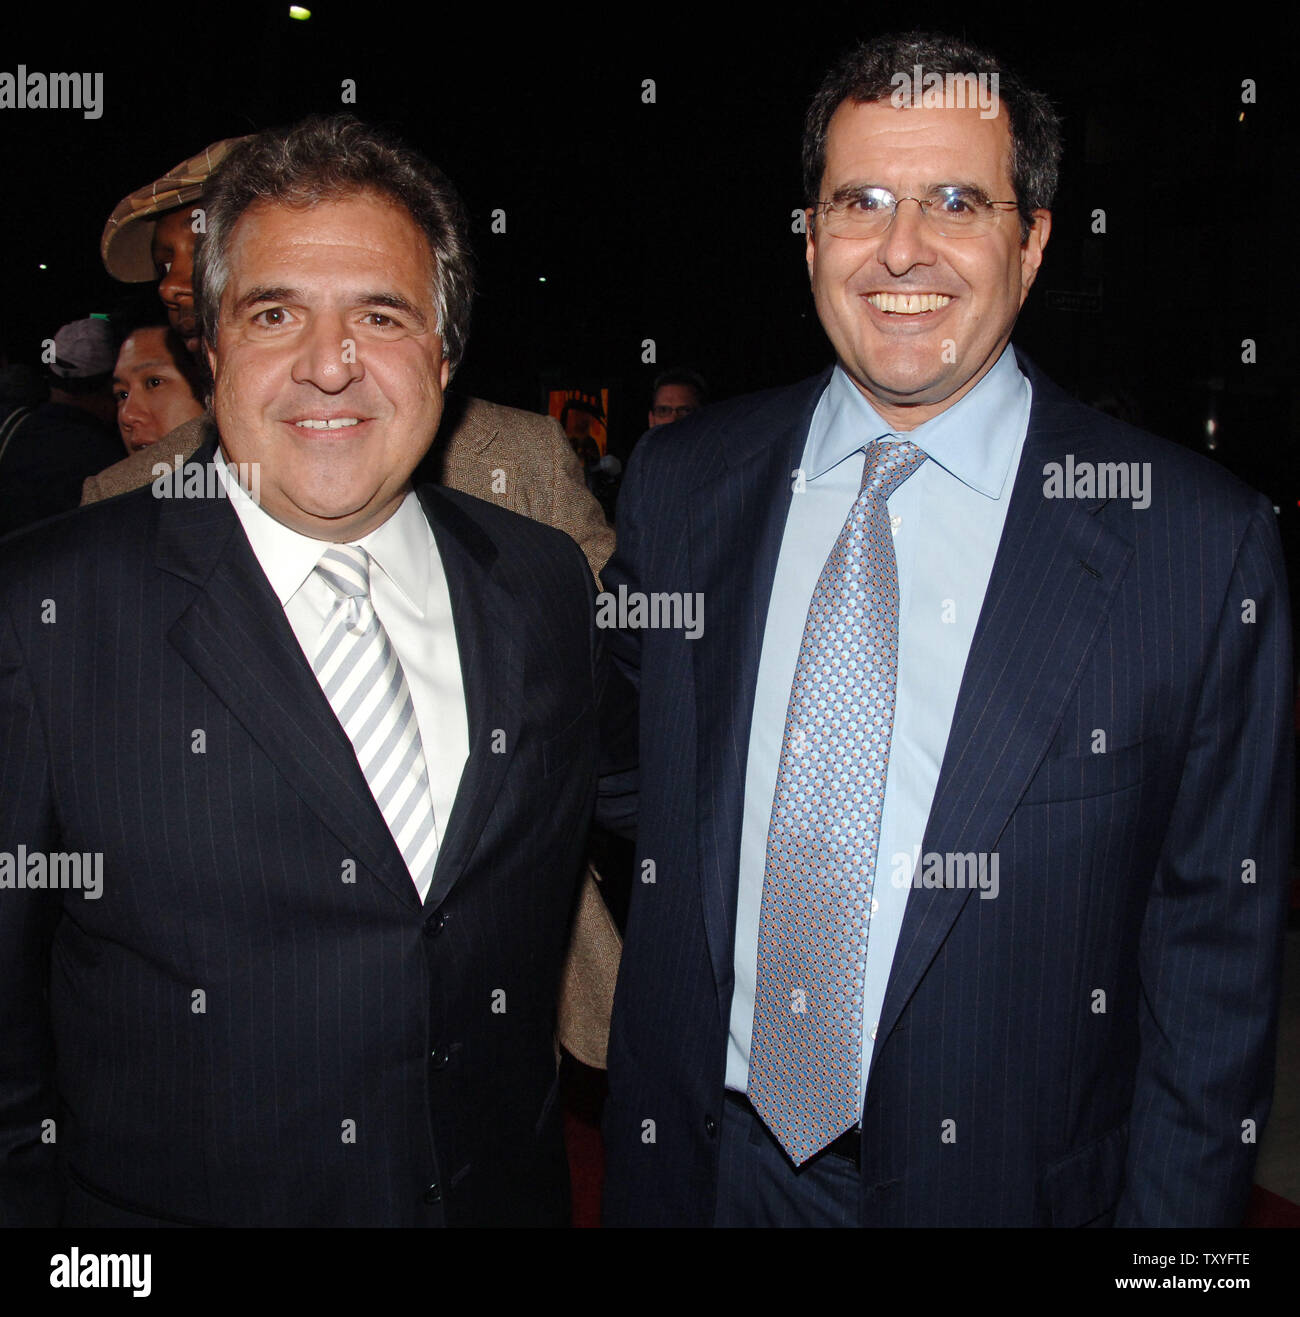 Peter Chernin (R), CEO of News Corporation and Jim Gianopulos, Chairman Fox Films Entertainment pose during the premiere of 'The Last King of Scotland' at the Academy of Motion Picture Arts & Sciences in Beverly Hills, California on September 21, 2006. The movie is based on the events of the brutal dictator Idi Amin's regime as seen by his personal physician during the 1970s. (UPI Photo/Jim Ruymen) Stock Photo